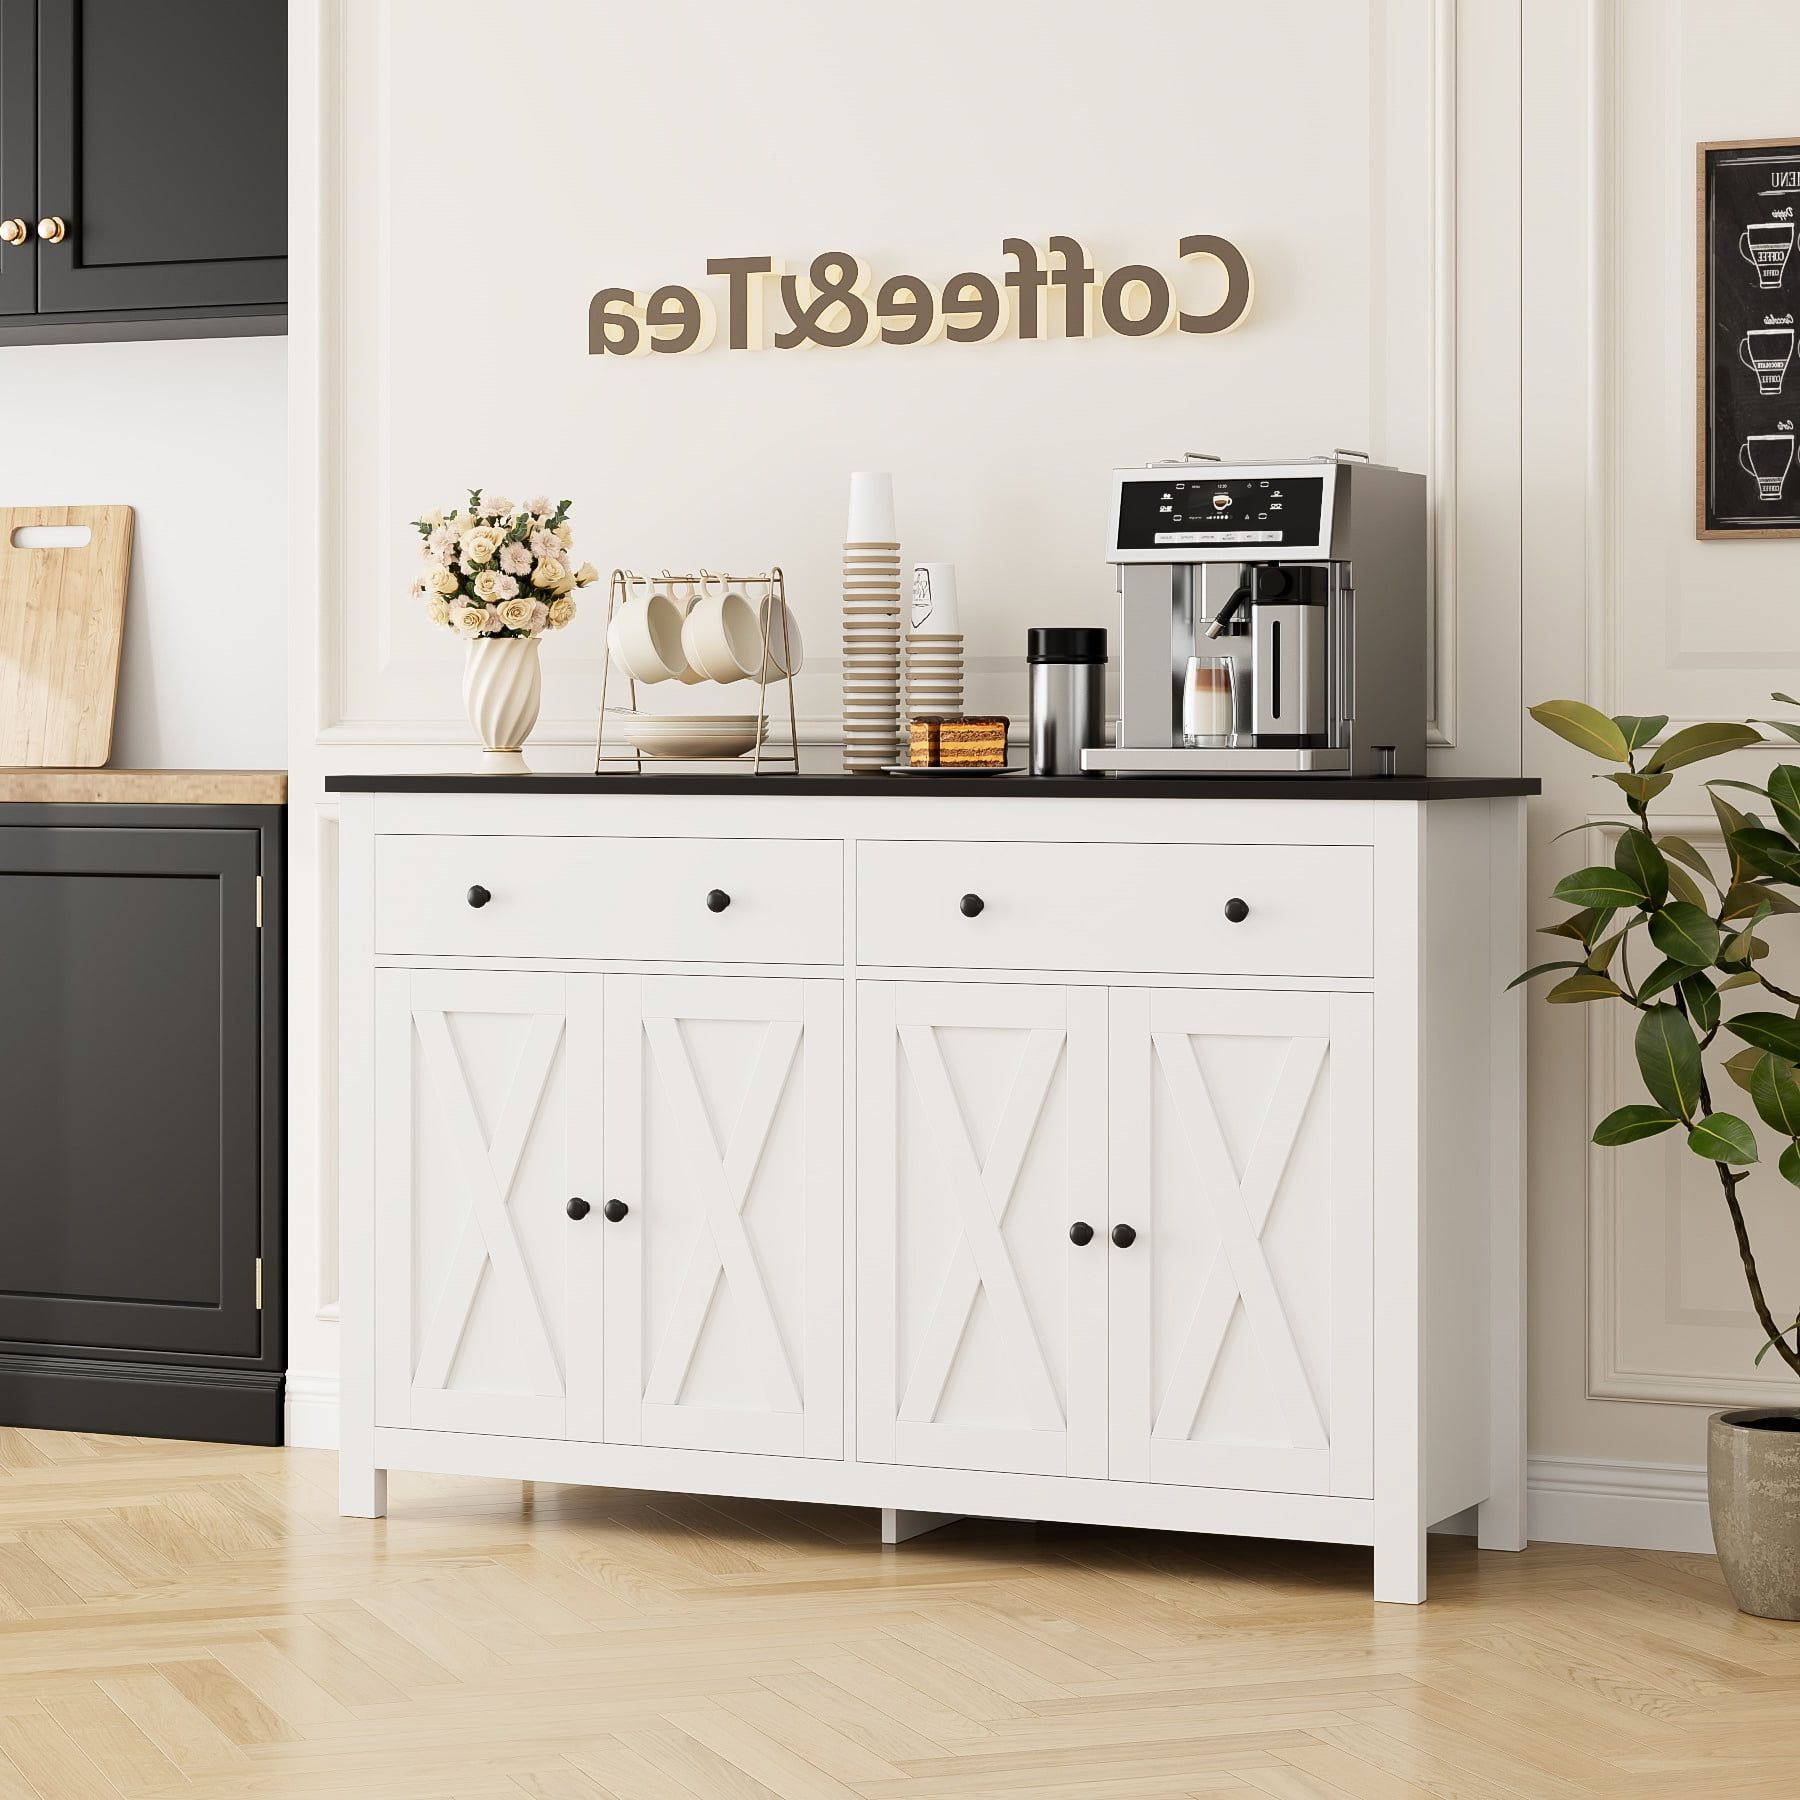 Newest Homfa 4 Doors With 2 Drawers Farmhouse Storage Cabinet, Wood Kitchen  Sideboard With Adjustable Shelves, White Black – Walmart For Sideboards With Adjustable Shelves (View 4 of 15)